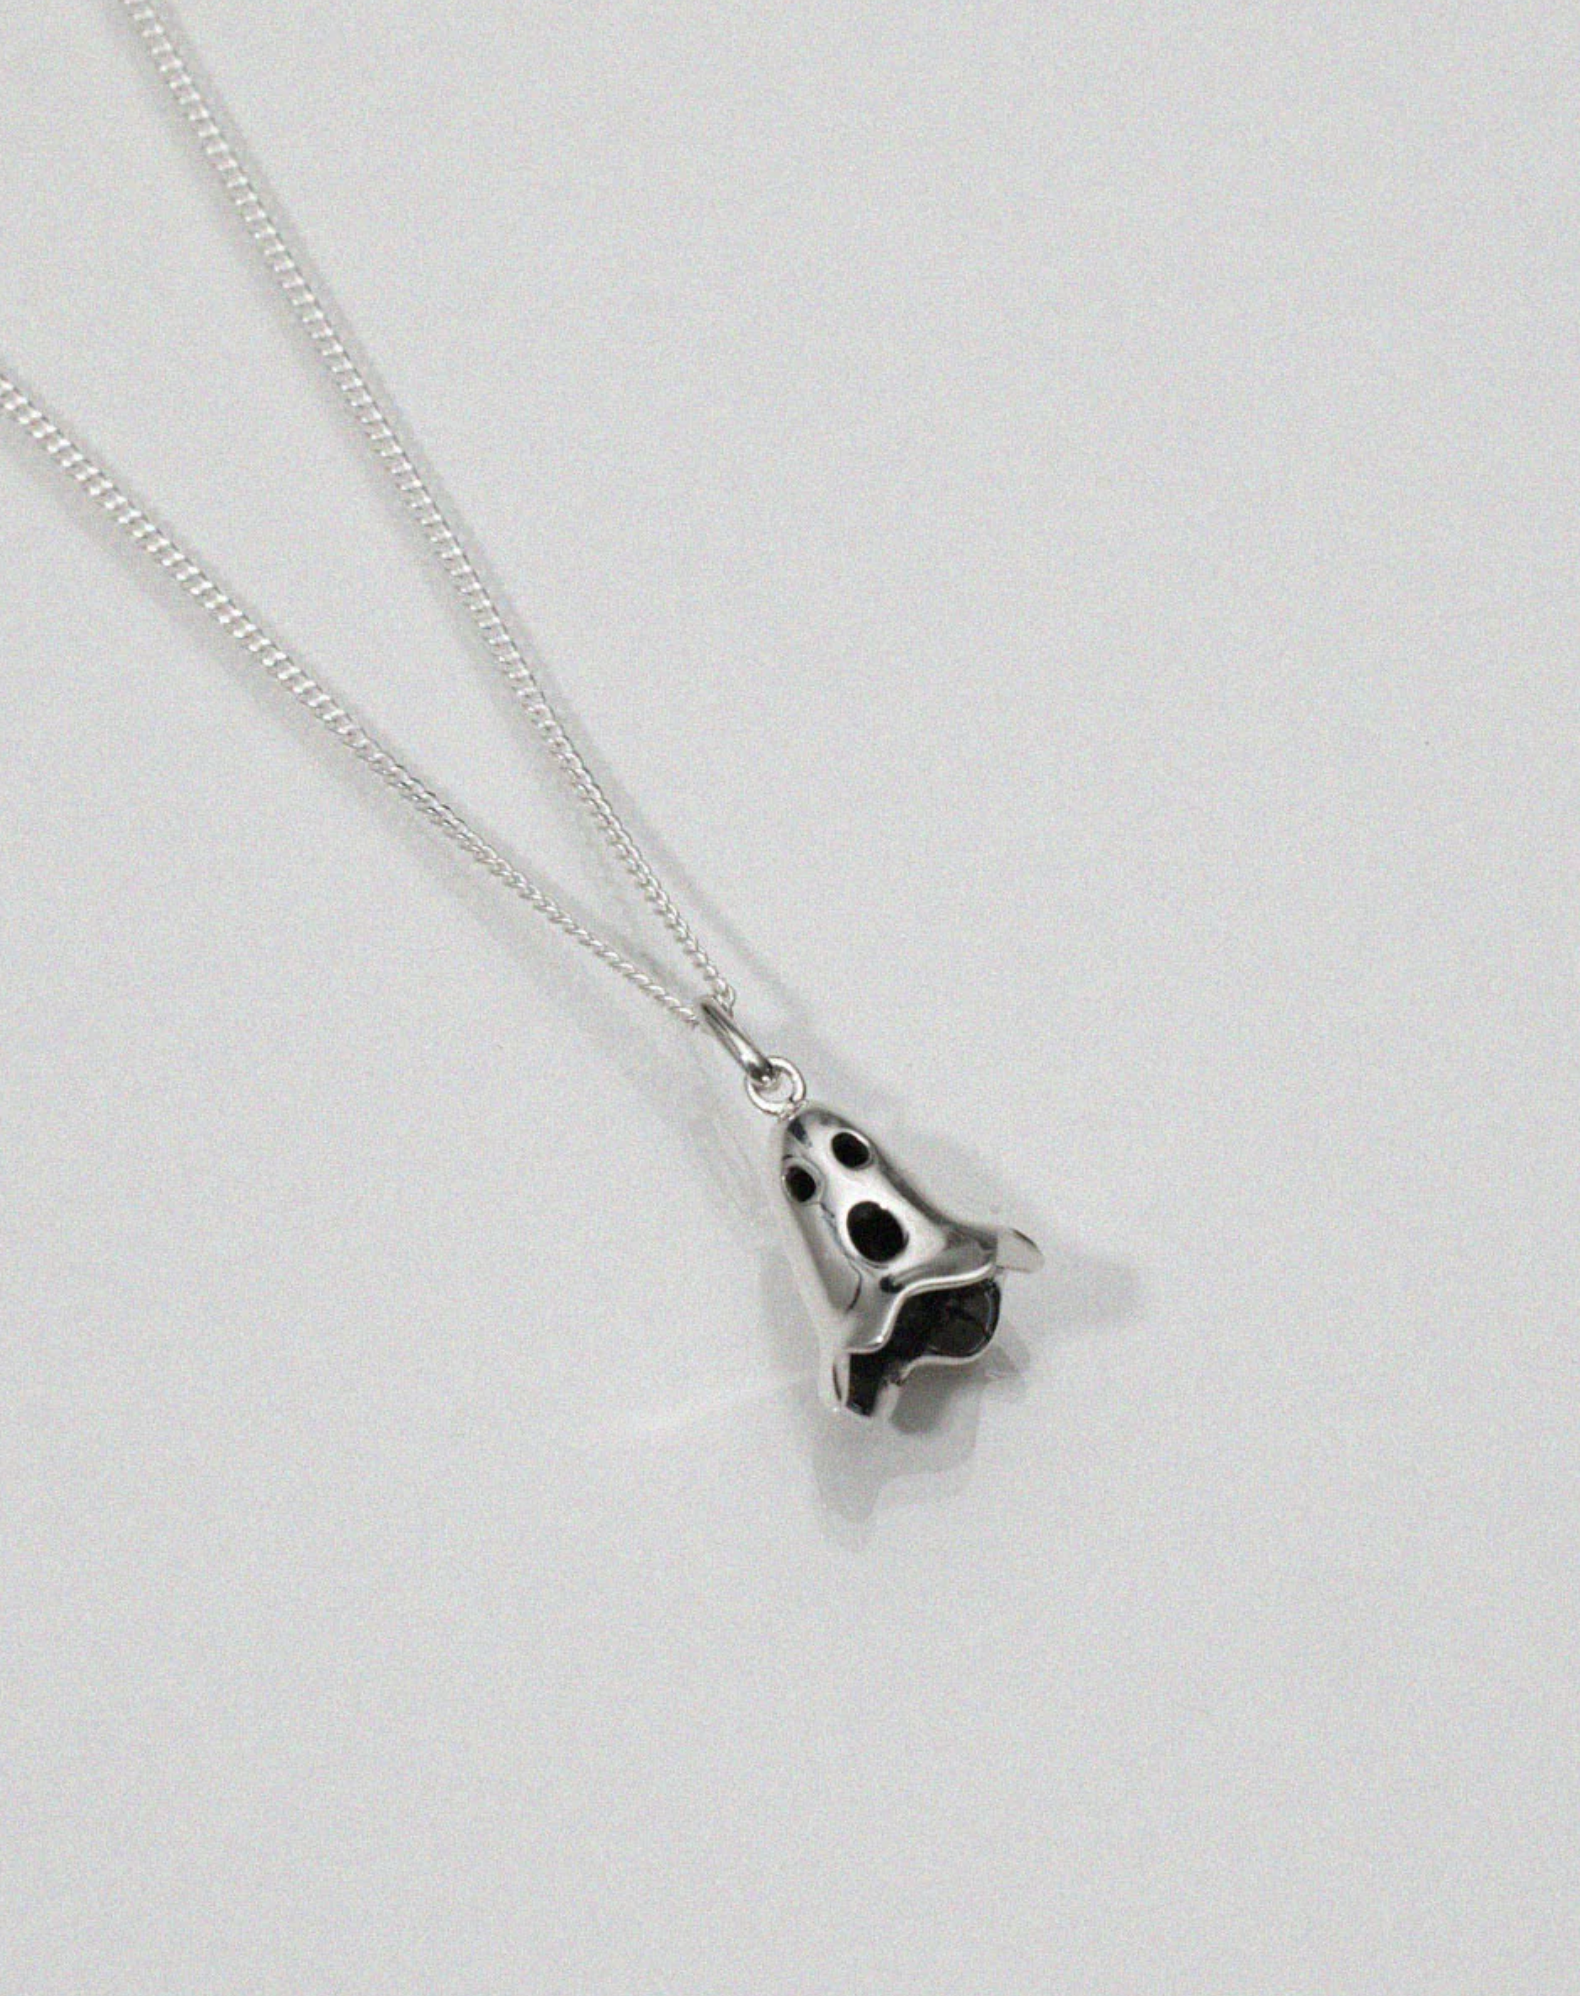 Nell x Meadowlark Ghost Necklace Sterling Silver